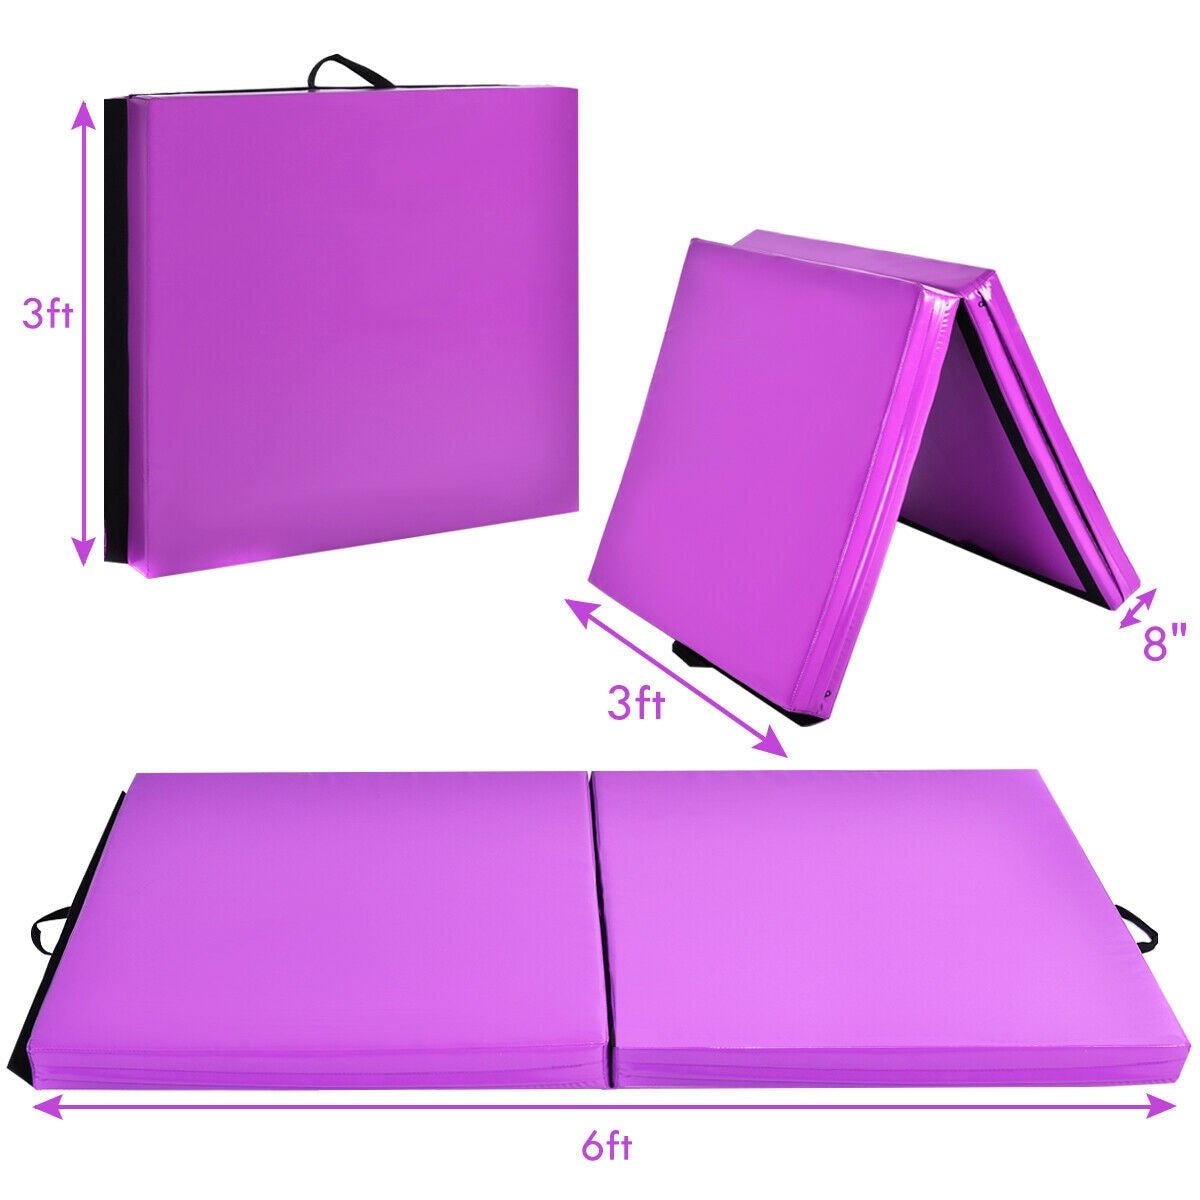 6 x 2 Feet Gymnastic Mat with Carrying Handles for Yoga